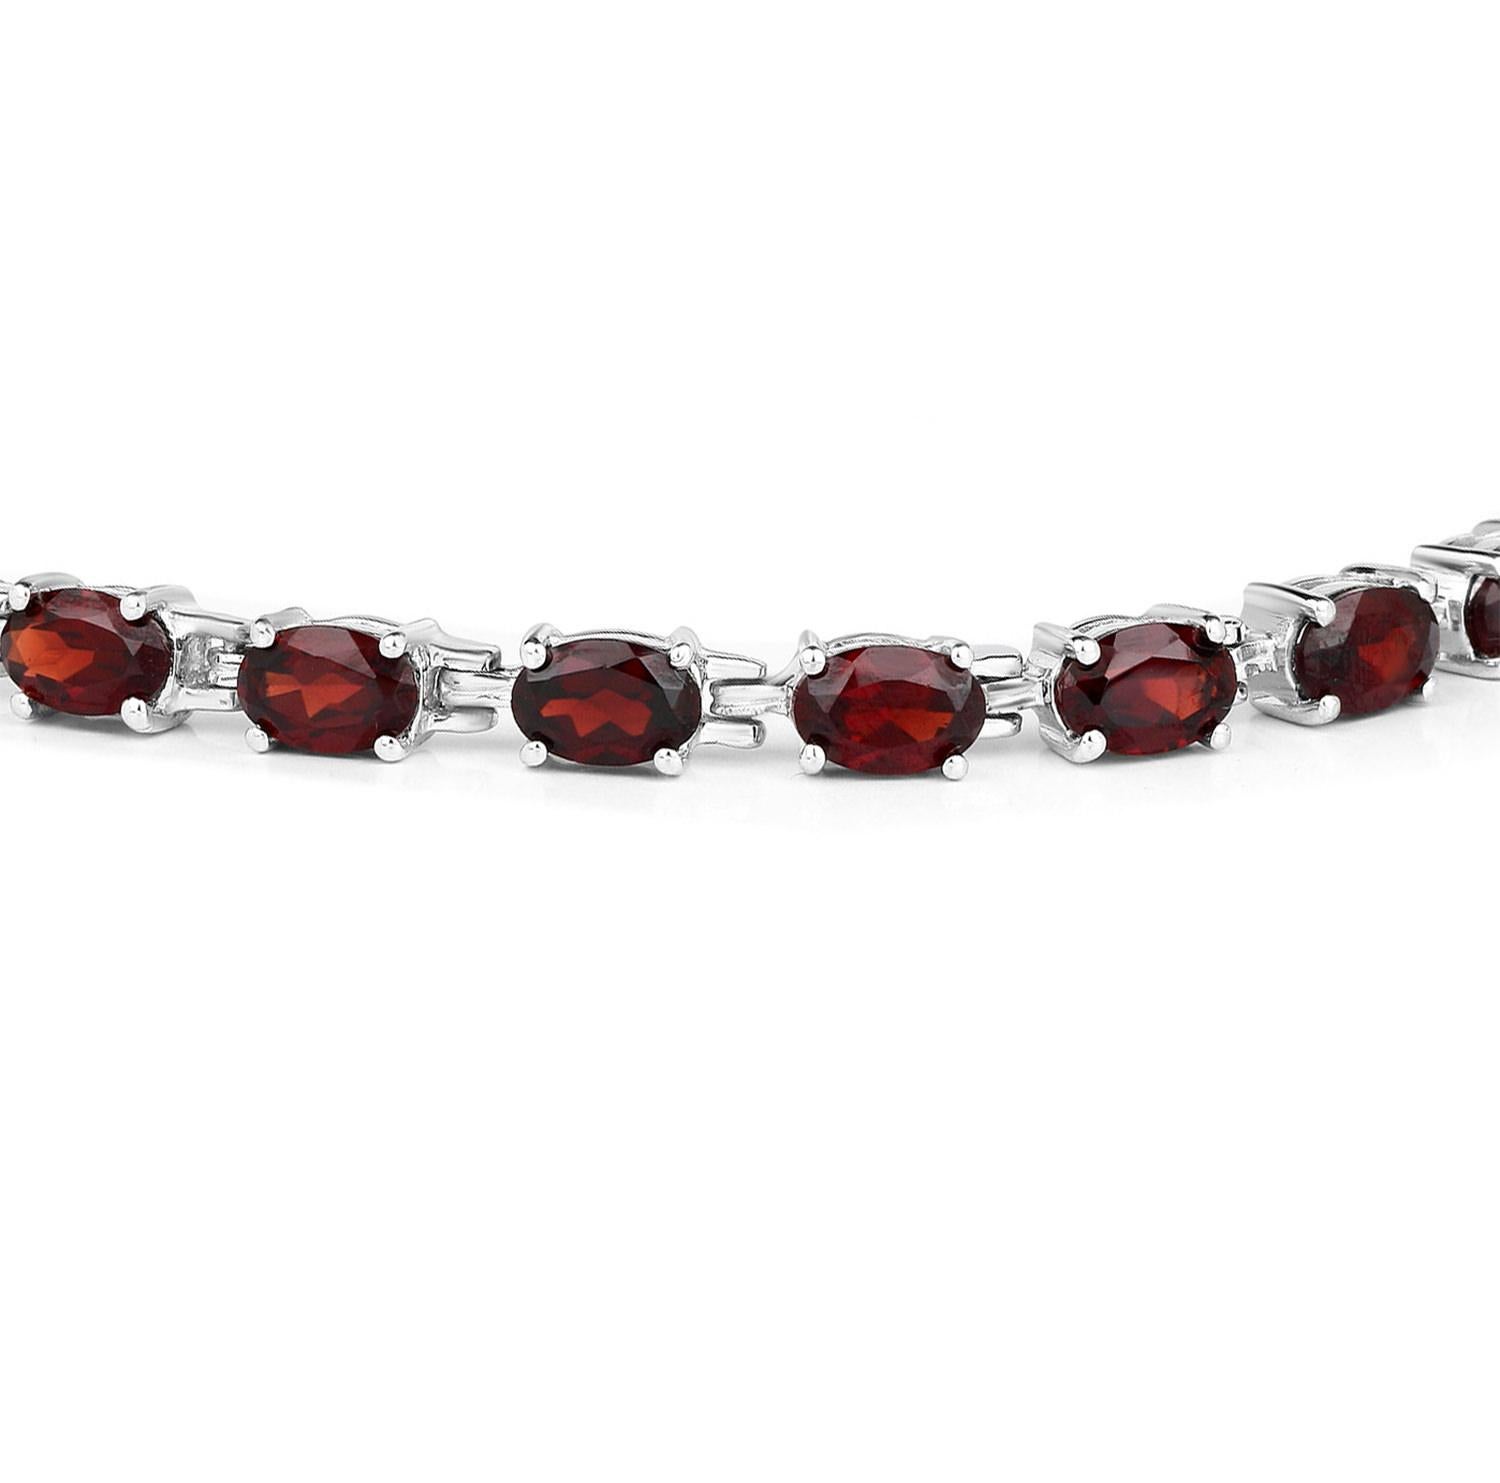 Oval Cut Red Garnet Tennis Bracelet 11.25 Carats Rhodium Plated Sterling Silver For Sale